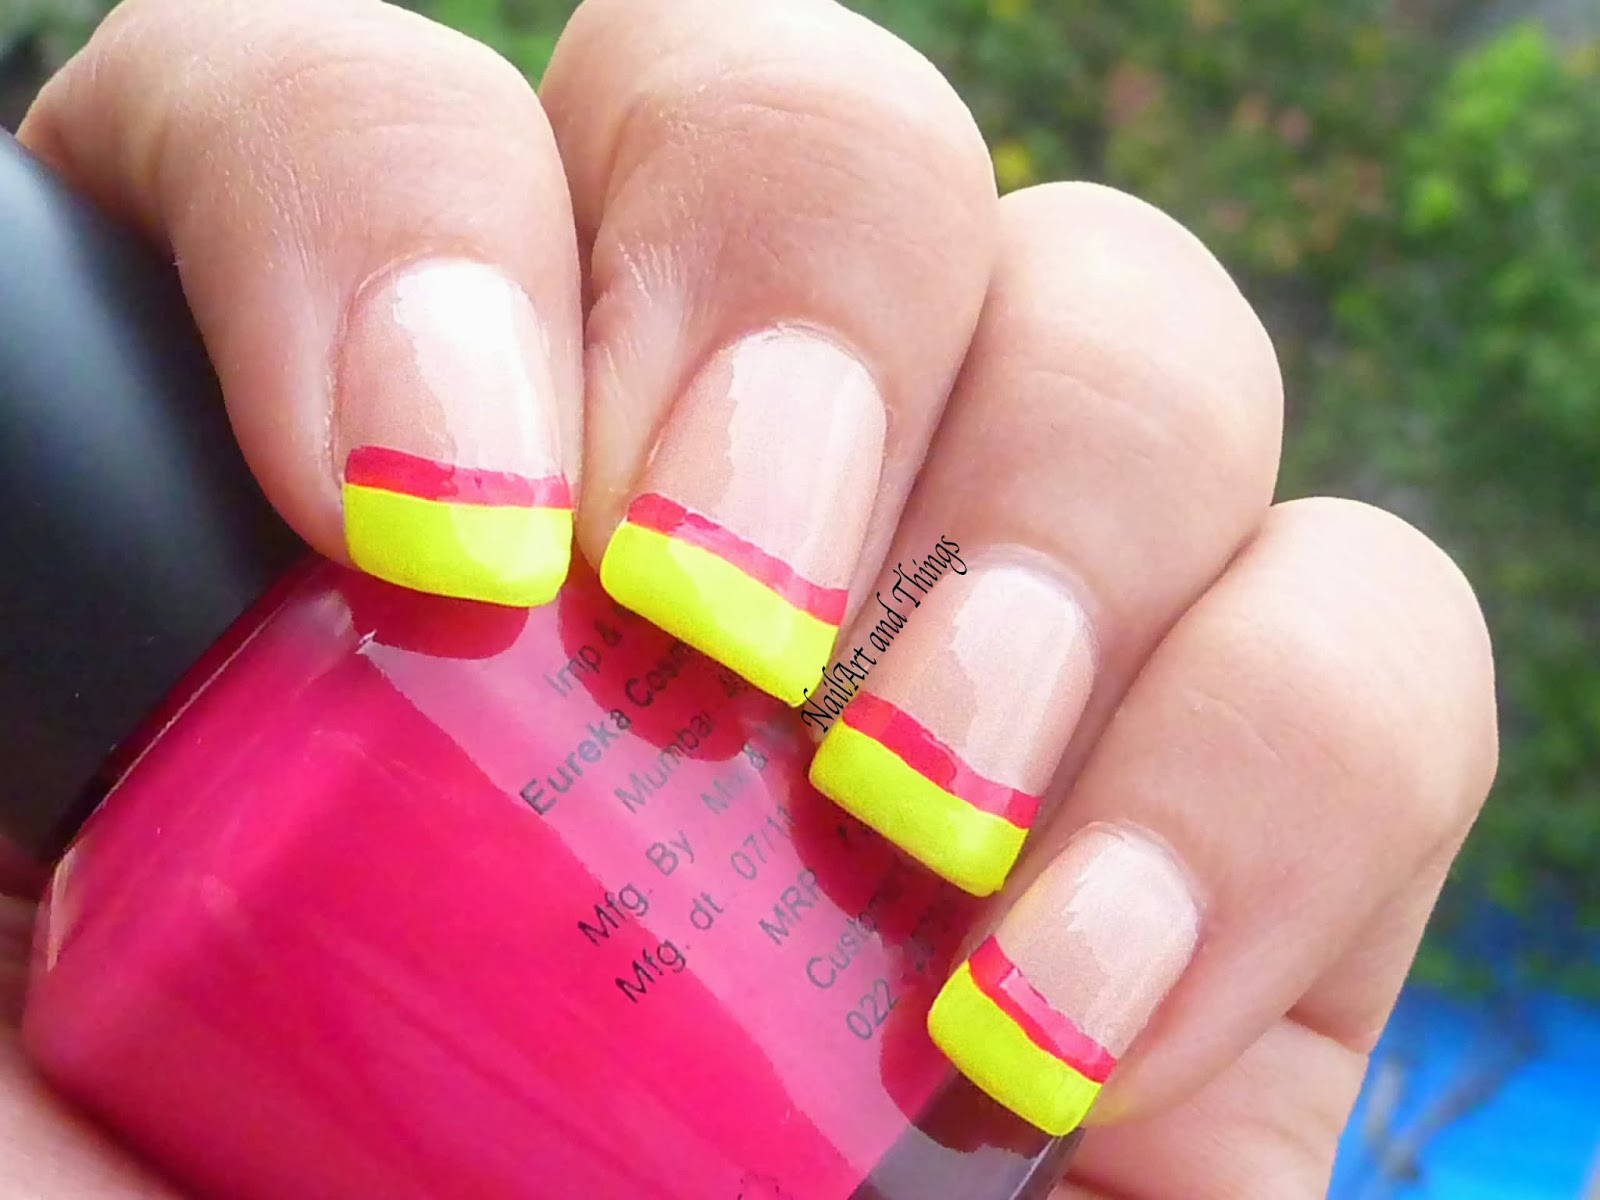 Neon Nail Art Designs: 10 Ideas to Brighten Up Your Look - wide 5